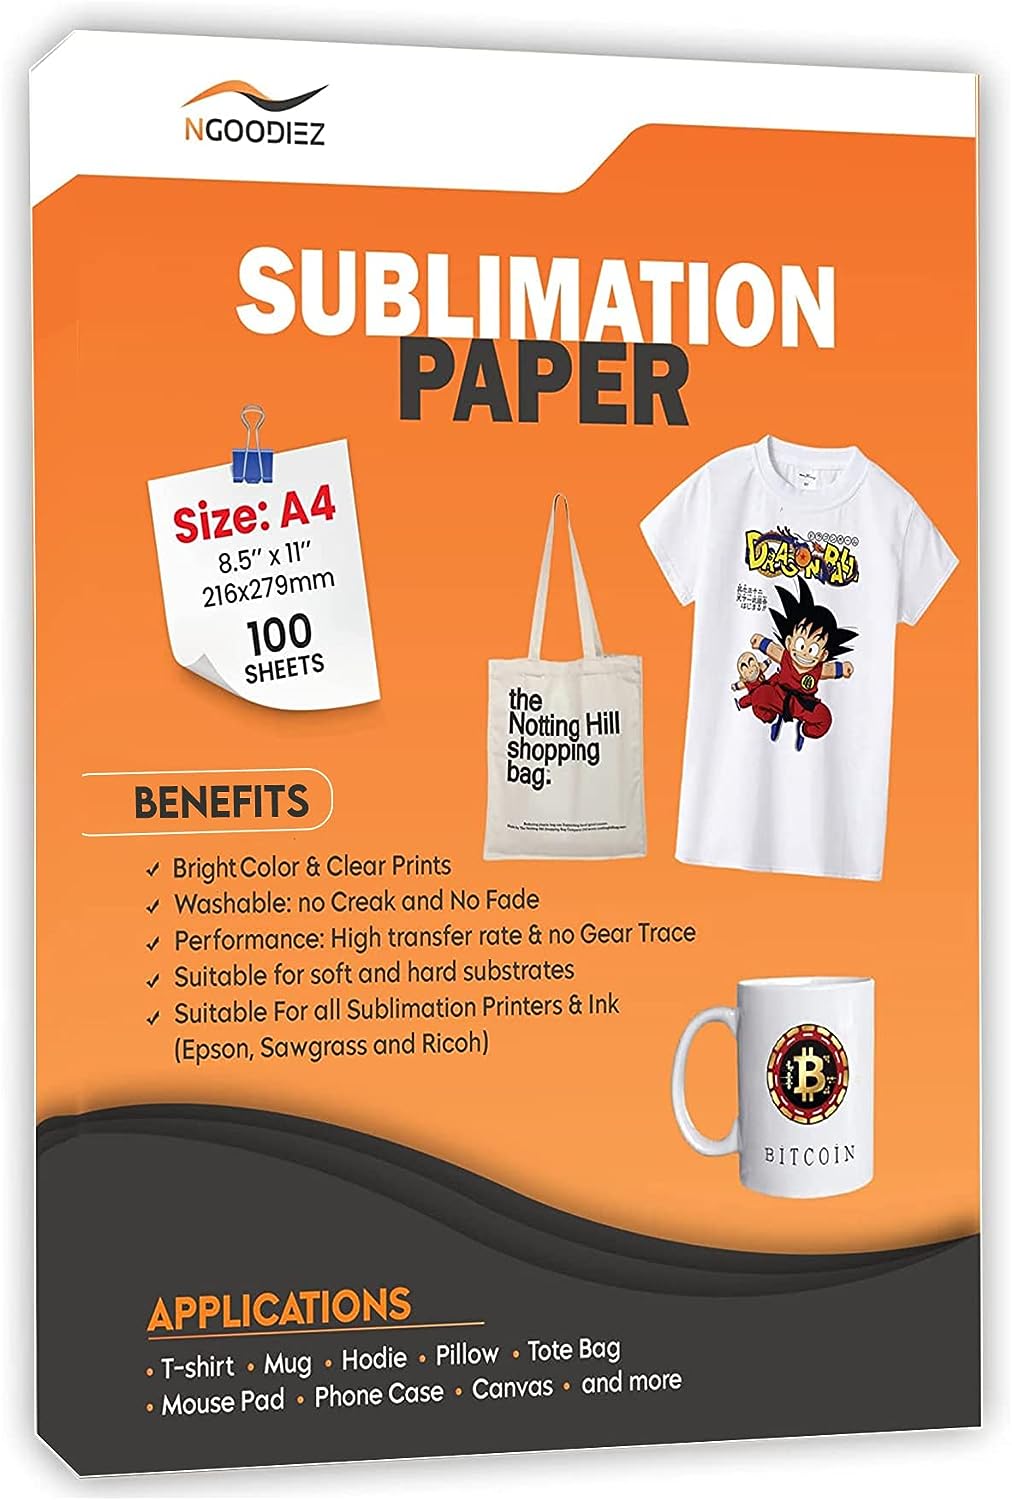 Best Sublimation Printer and papers for T-shirts Printing